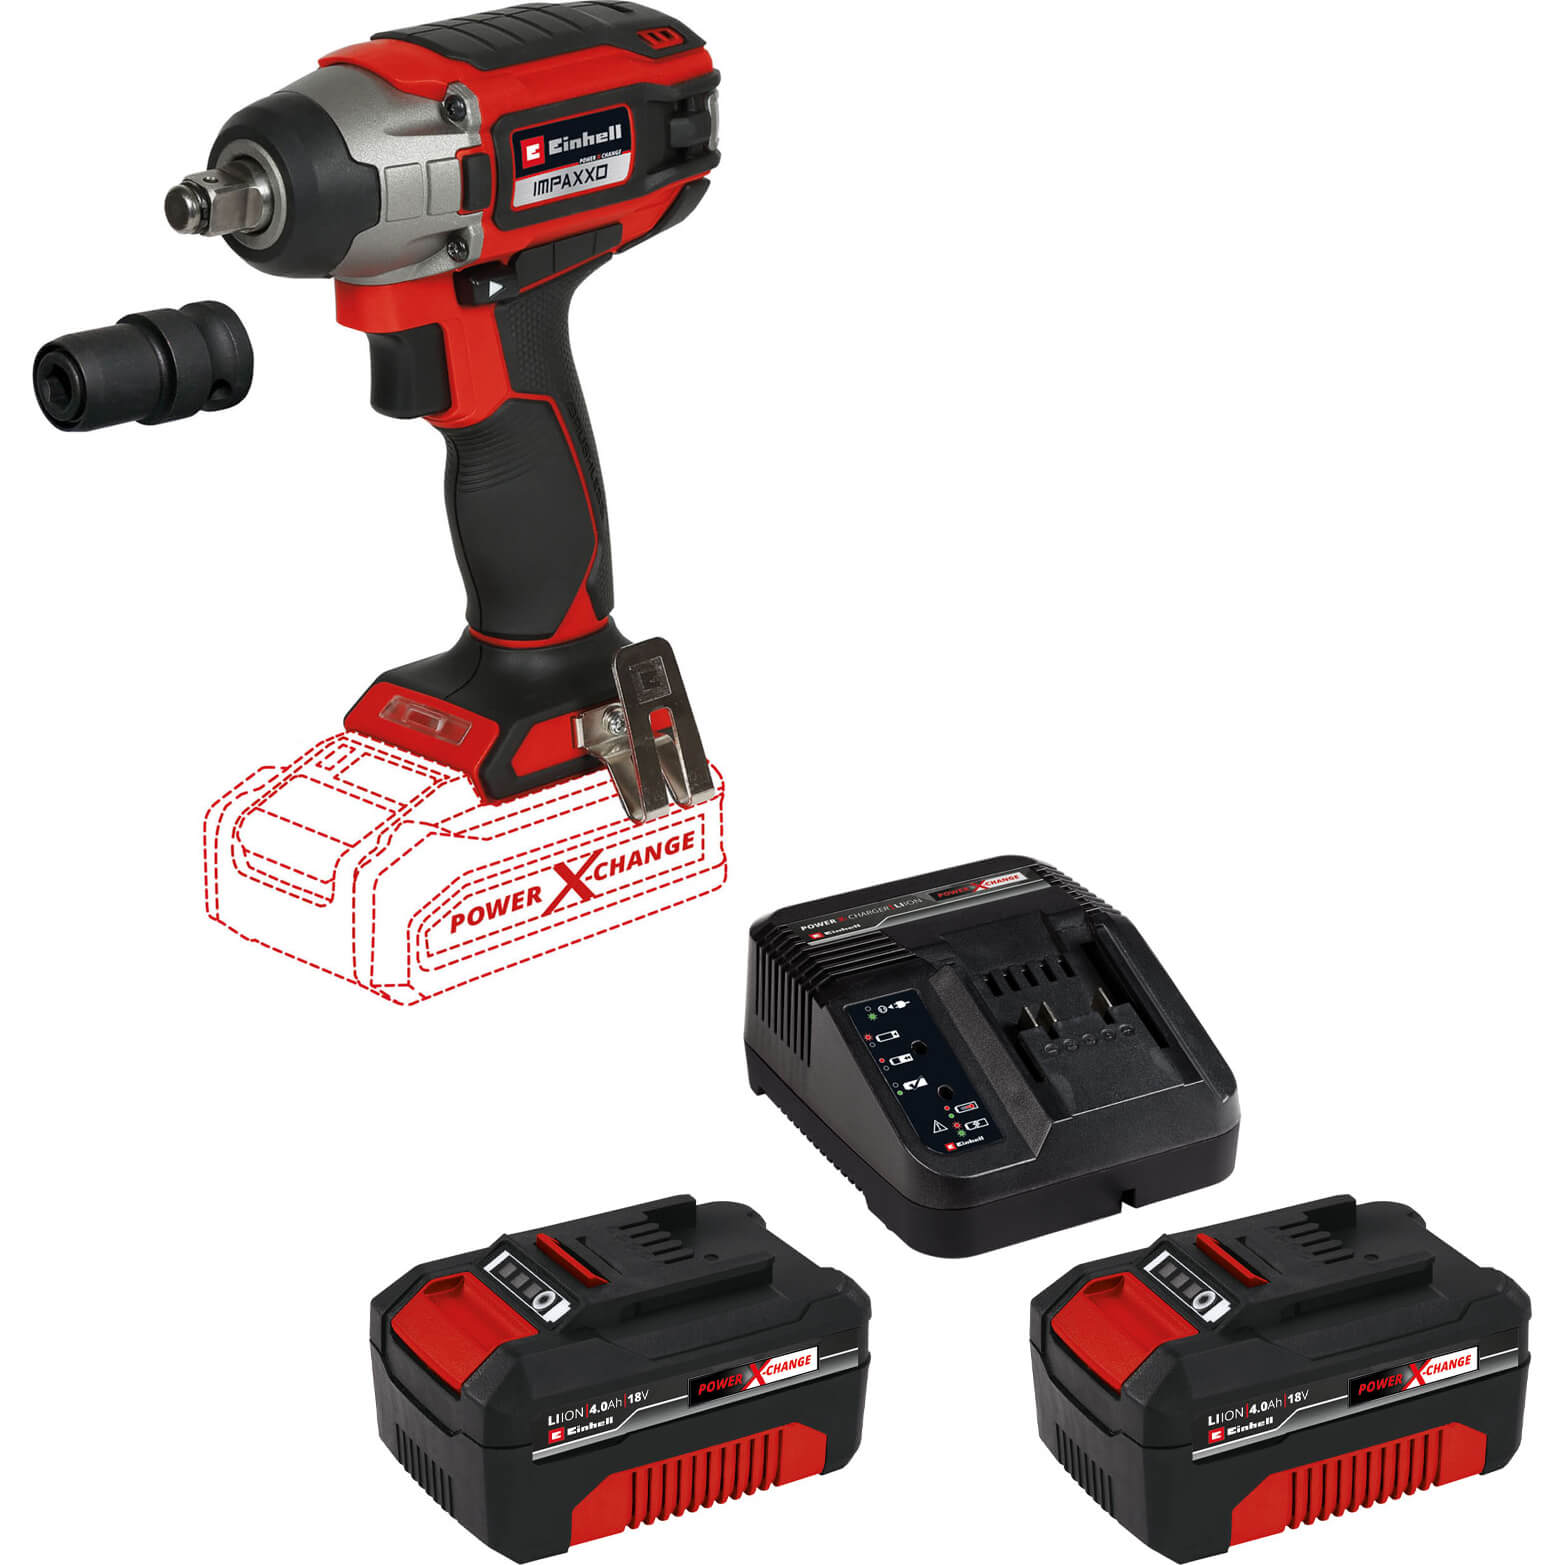 Image of Einhell IMPAXXO 18/230 18v Cordless Brushless 1/2" Impact Wrench 2 x 4ah Li-ion Charger No Case